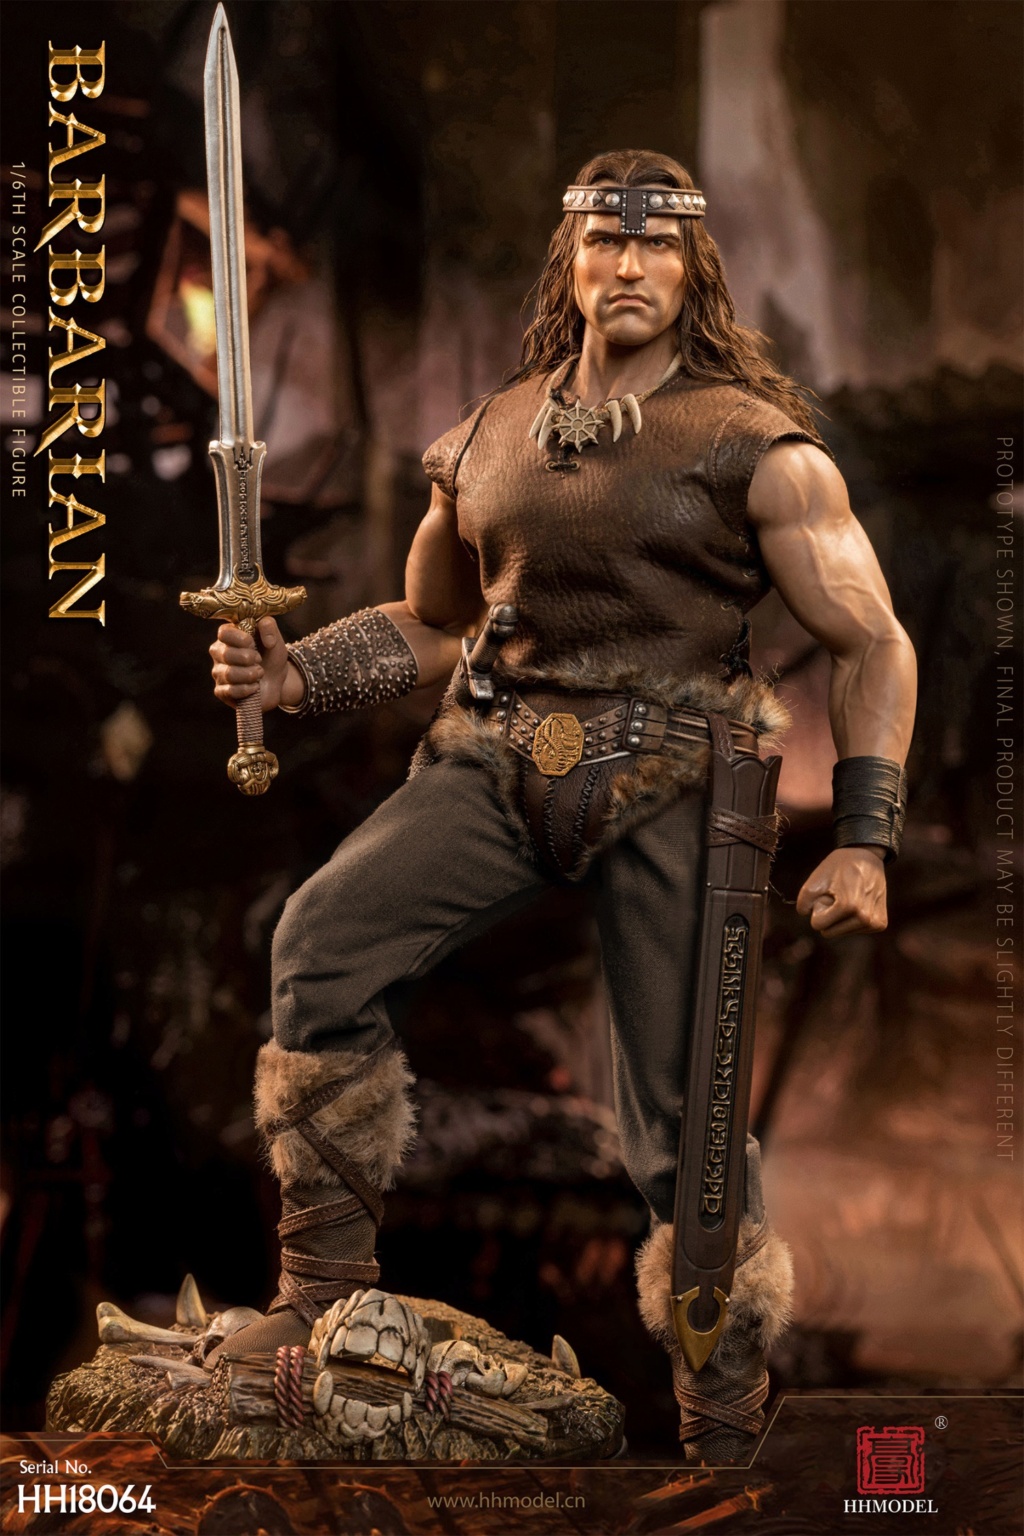 NEW PRODUCT: Haoyutoys: HH18064 1/6 Scale The Barbarian 18000810